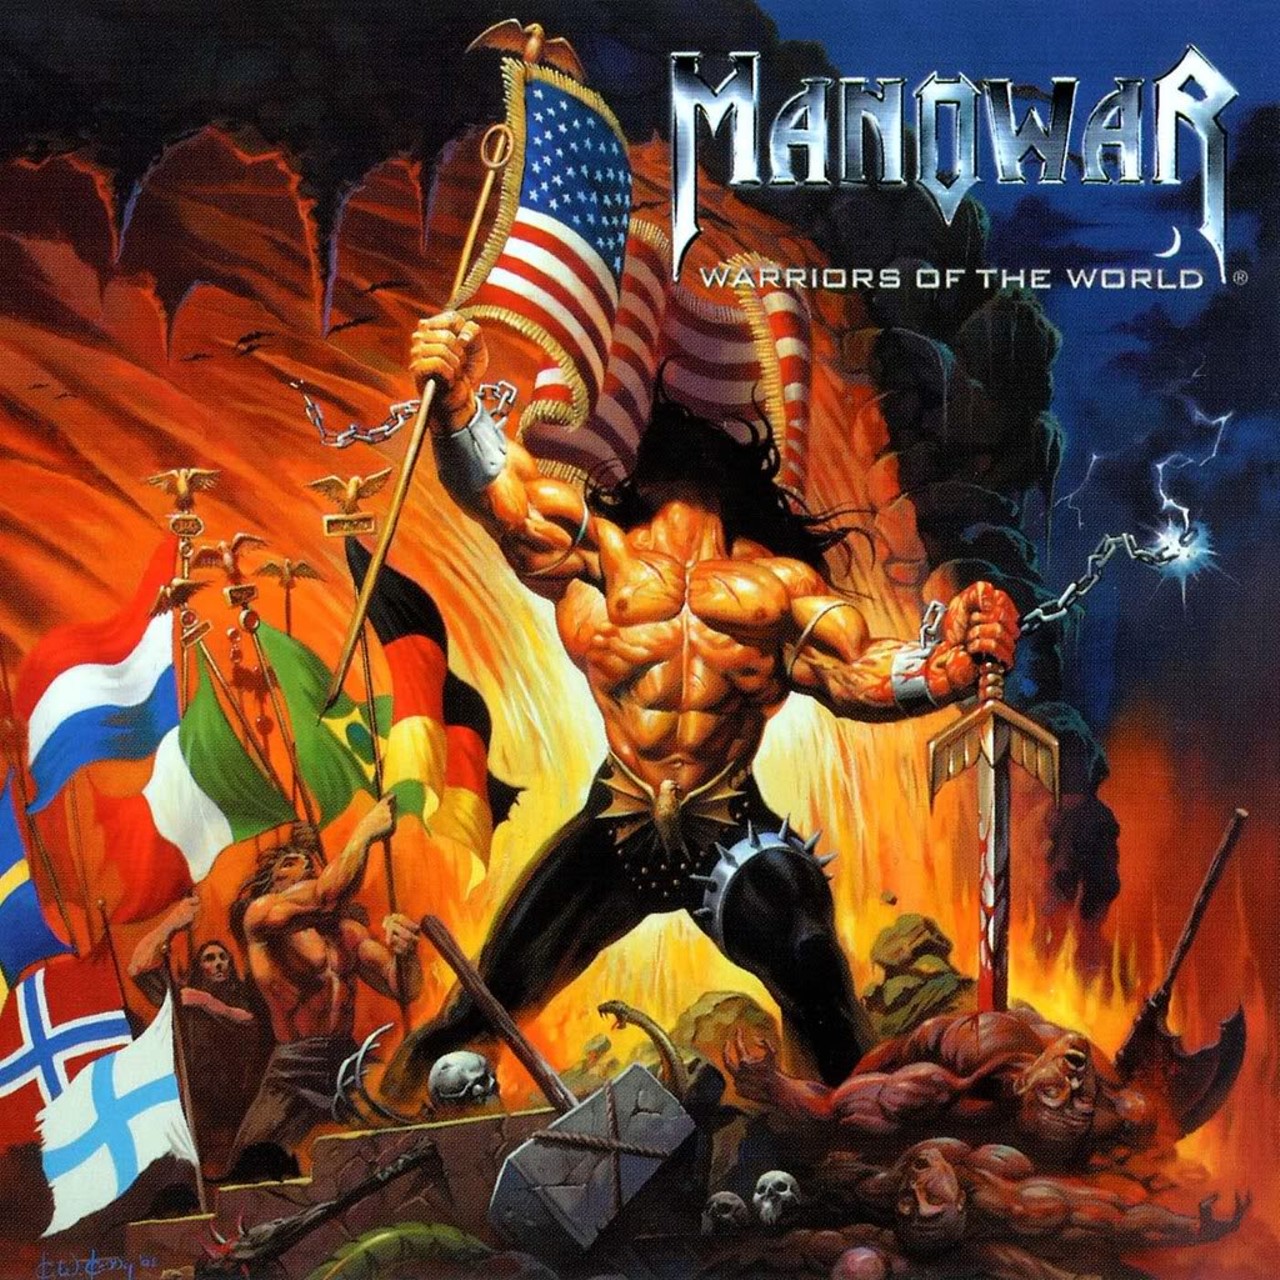 Manowar - Warriors of the World (2002)
Manowar isn't exactly a band that's ever taken seriously, but this album cover, which is filled with various countries' flags, might be one of its more over-the-top moments. But once you dig into the content of the disc it starts to make a bit more sense as a number of the tracks are tributes to fallen heroes from various countries, including Wagner, Pavarotti, Presley and more. Okay, that might be stretching it a bit, but it's awesome looking either way.